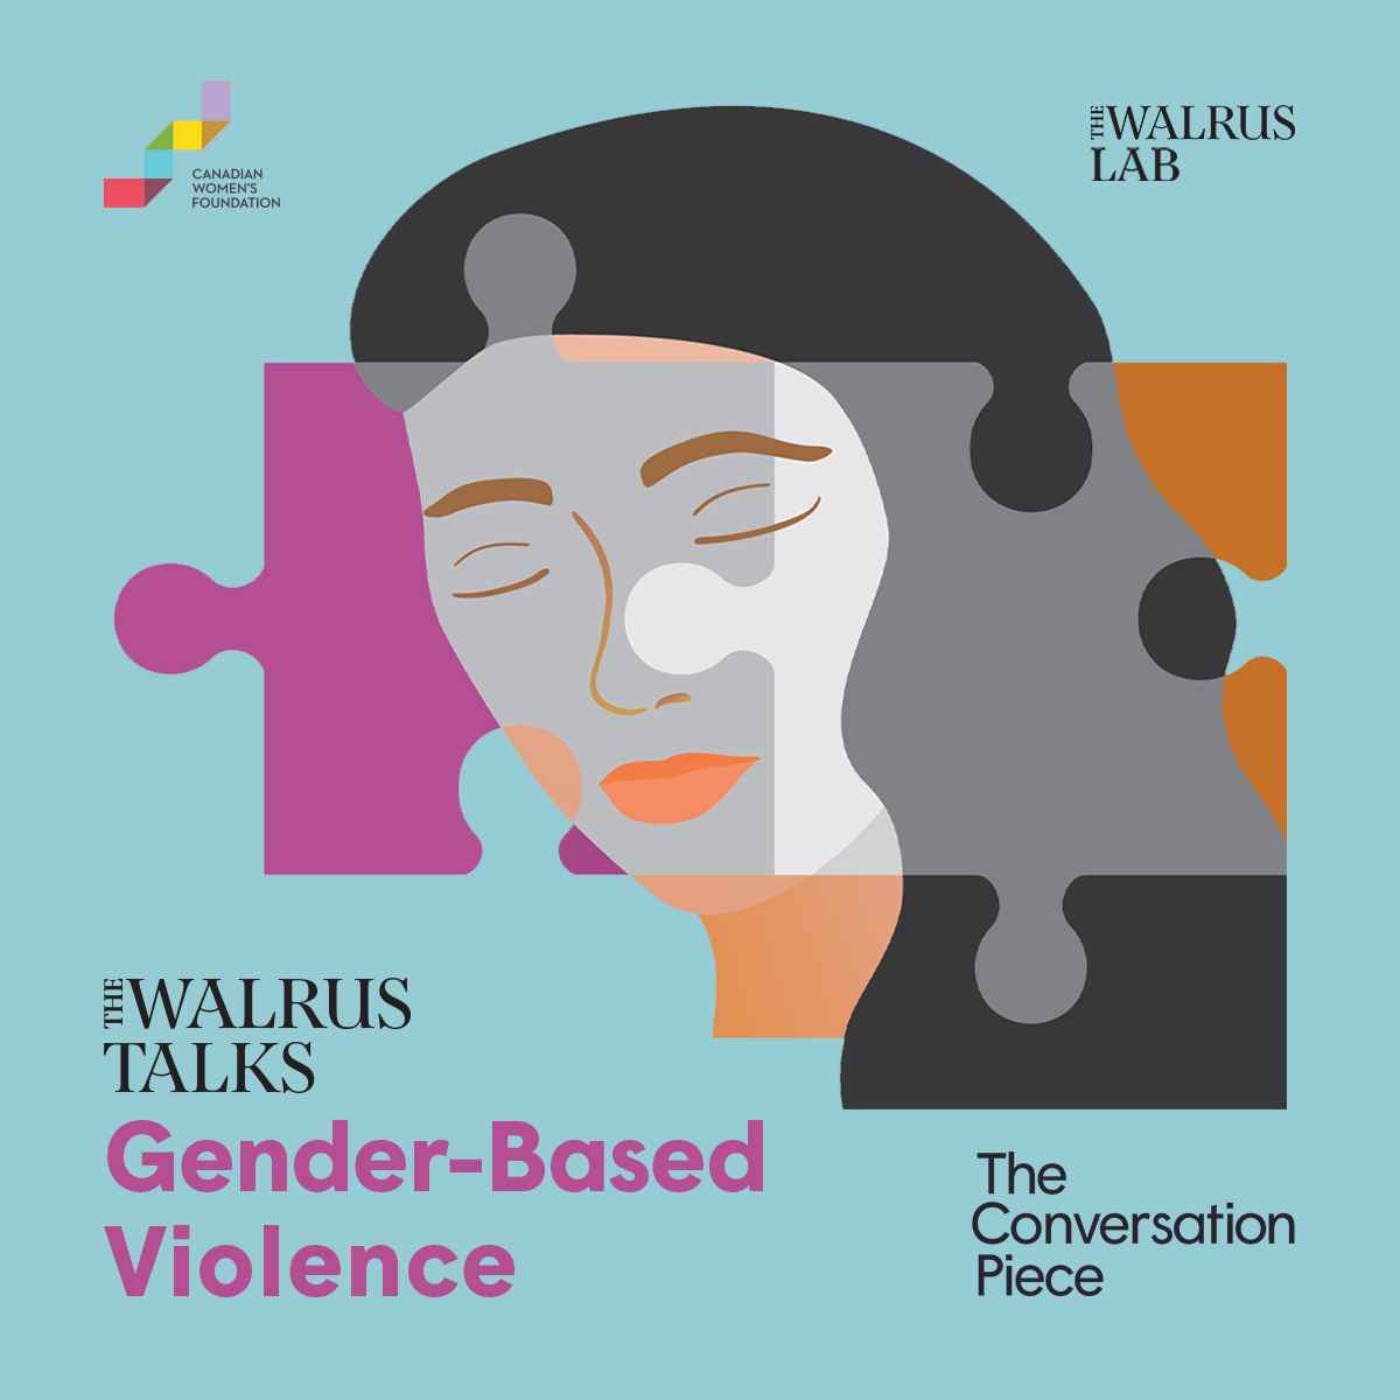 Paulette Senior: Gender-Based Violence Is Not an Exceptional Experience